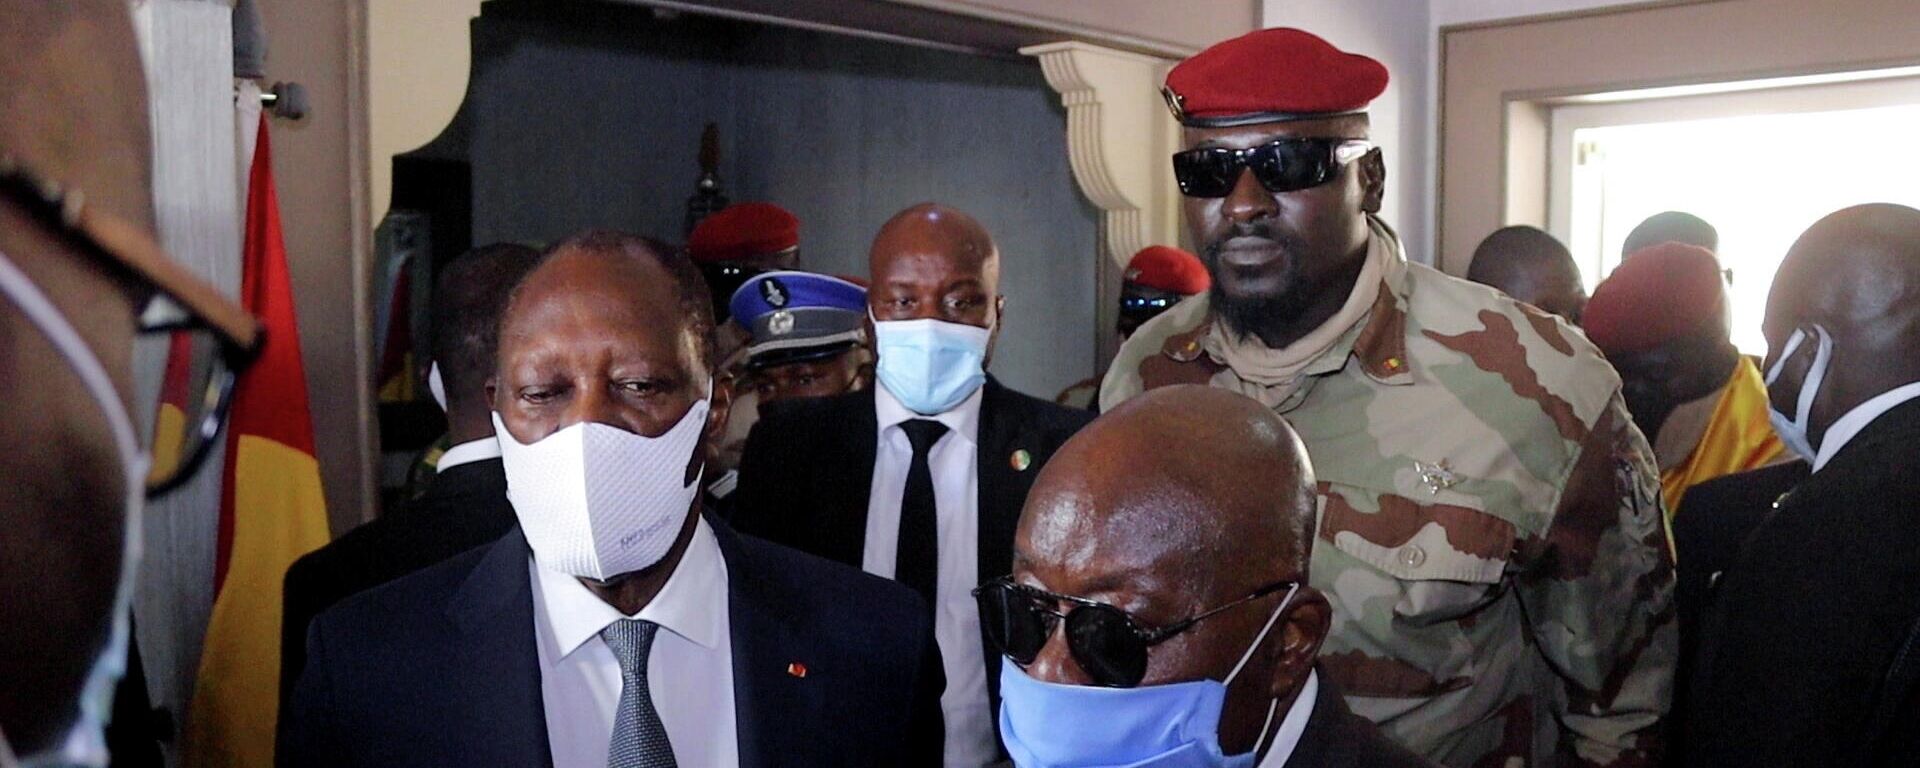 Ghana's President Nana Akufo-Addo speaks to members of the media as Ivory Coast's President Alassane Ouattara, and Guinea's Special forces commander Mamady Doumbouya, who ousted President Alpha Conde, stand next to him after their meeting to discuss ways to return Guinea to constitutional order, in Conakry, Guinea, September 17, 2021. - Sputnik International, 1920, 27.09.2021